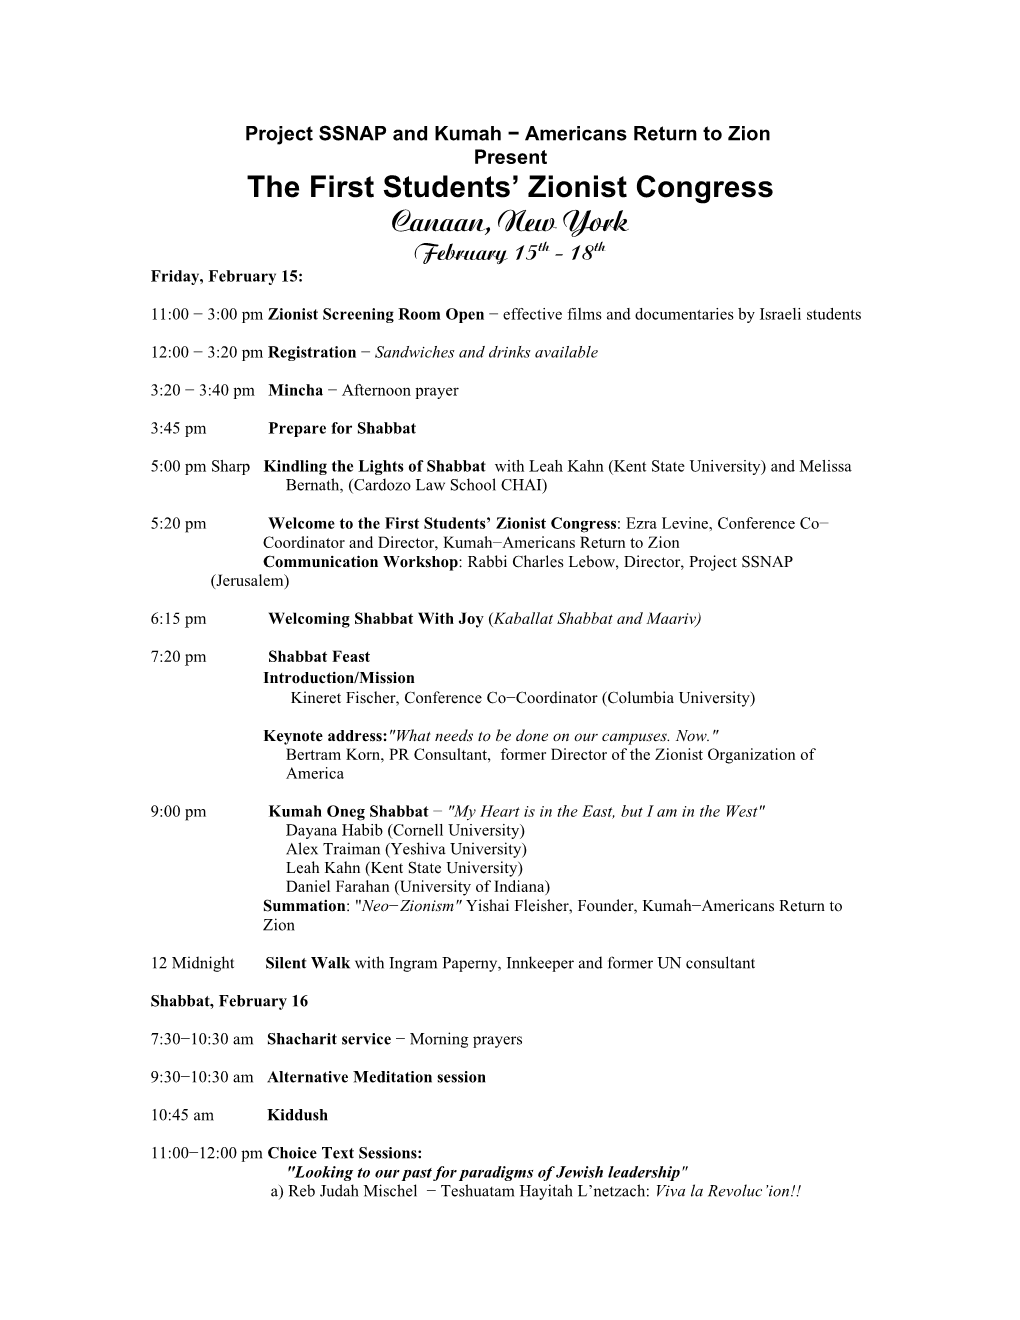 The First Students' Zionist Congress Canaan, New York